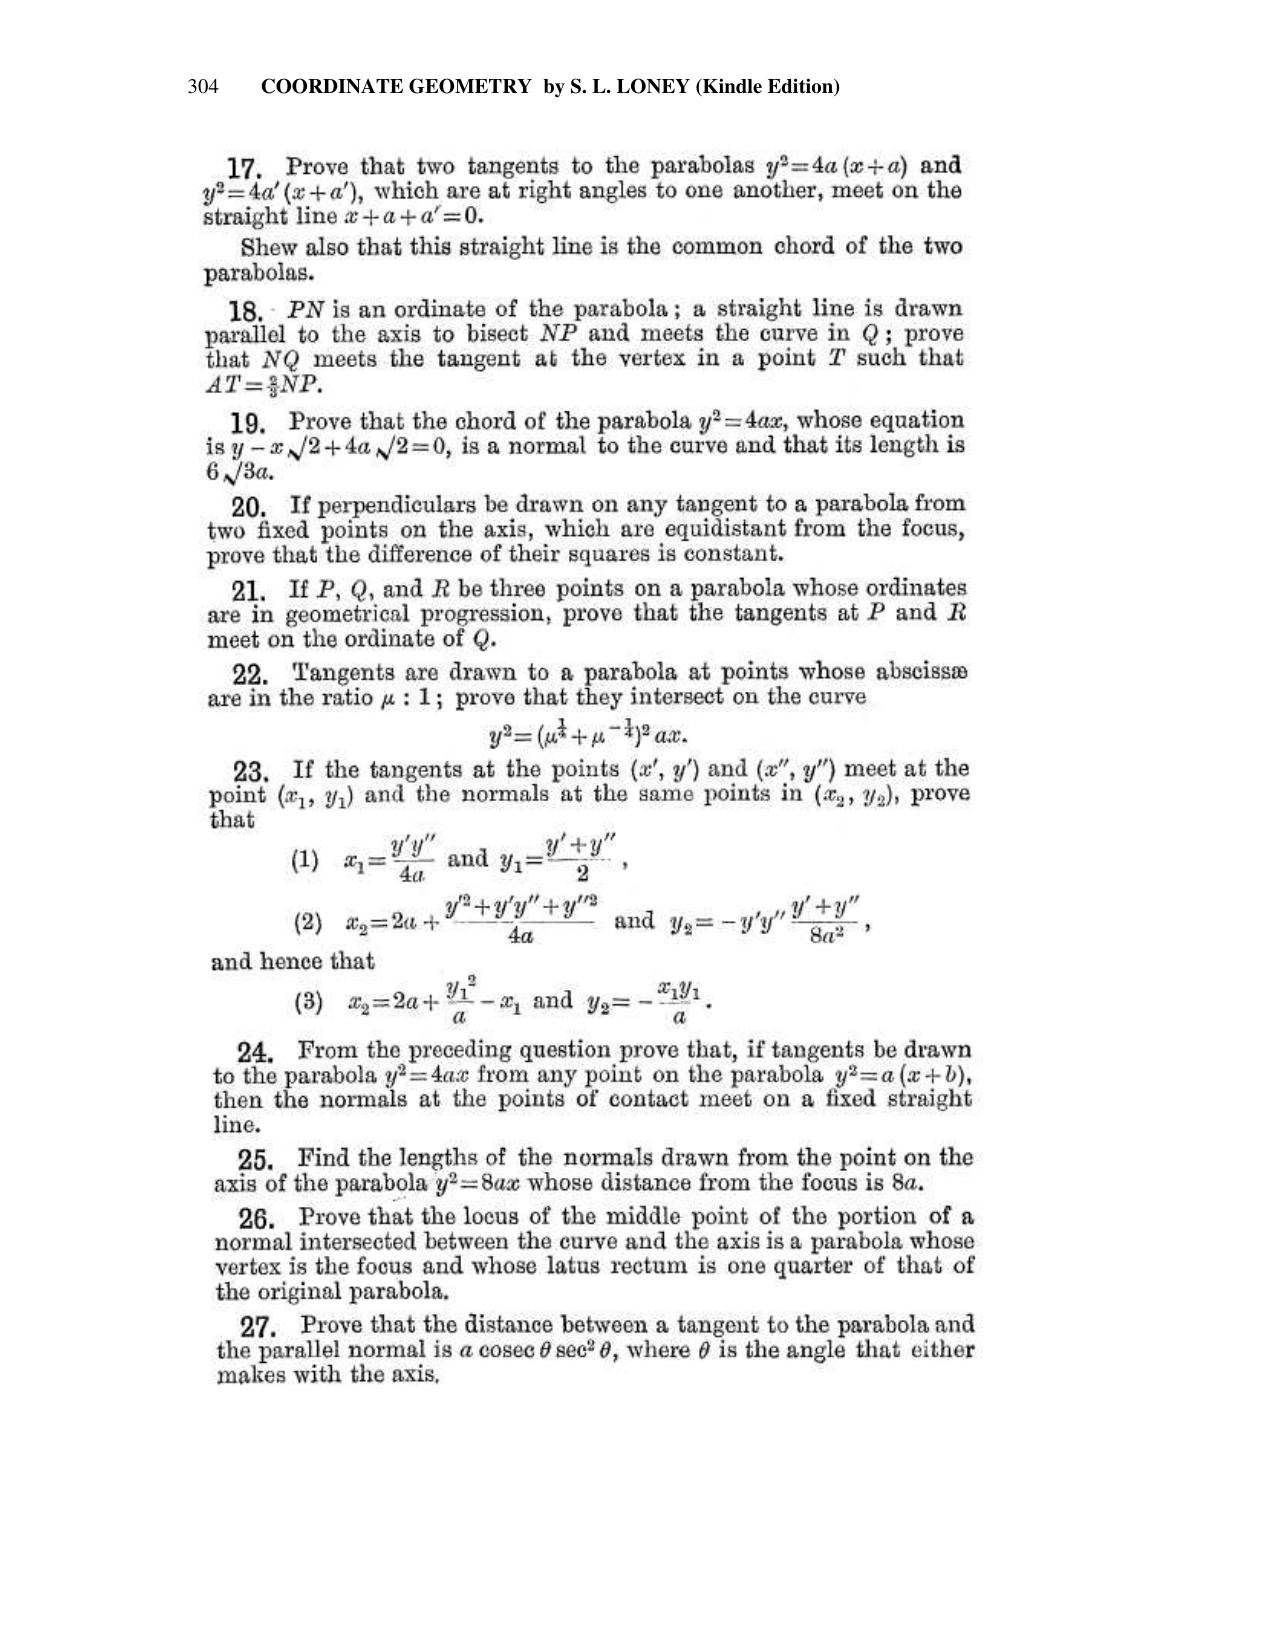 Chapter 10: The Parabola - SL Loney Solutions: The Elements of Coordinate Geometry - Page 18